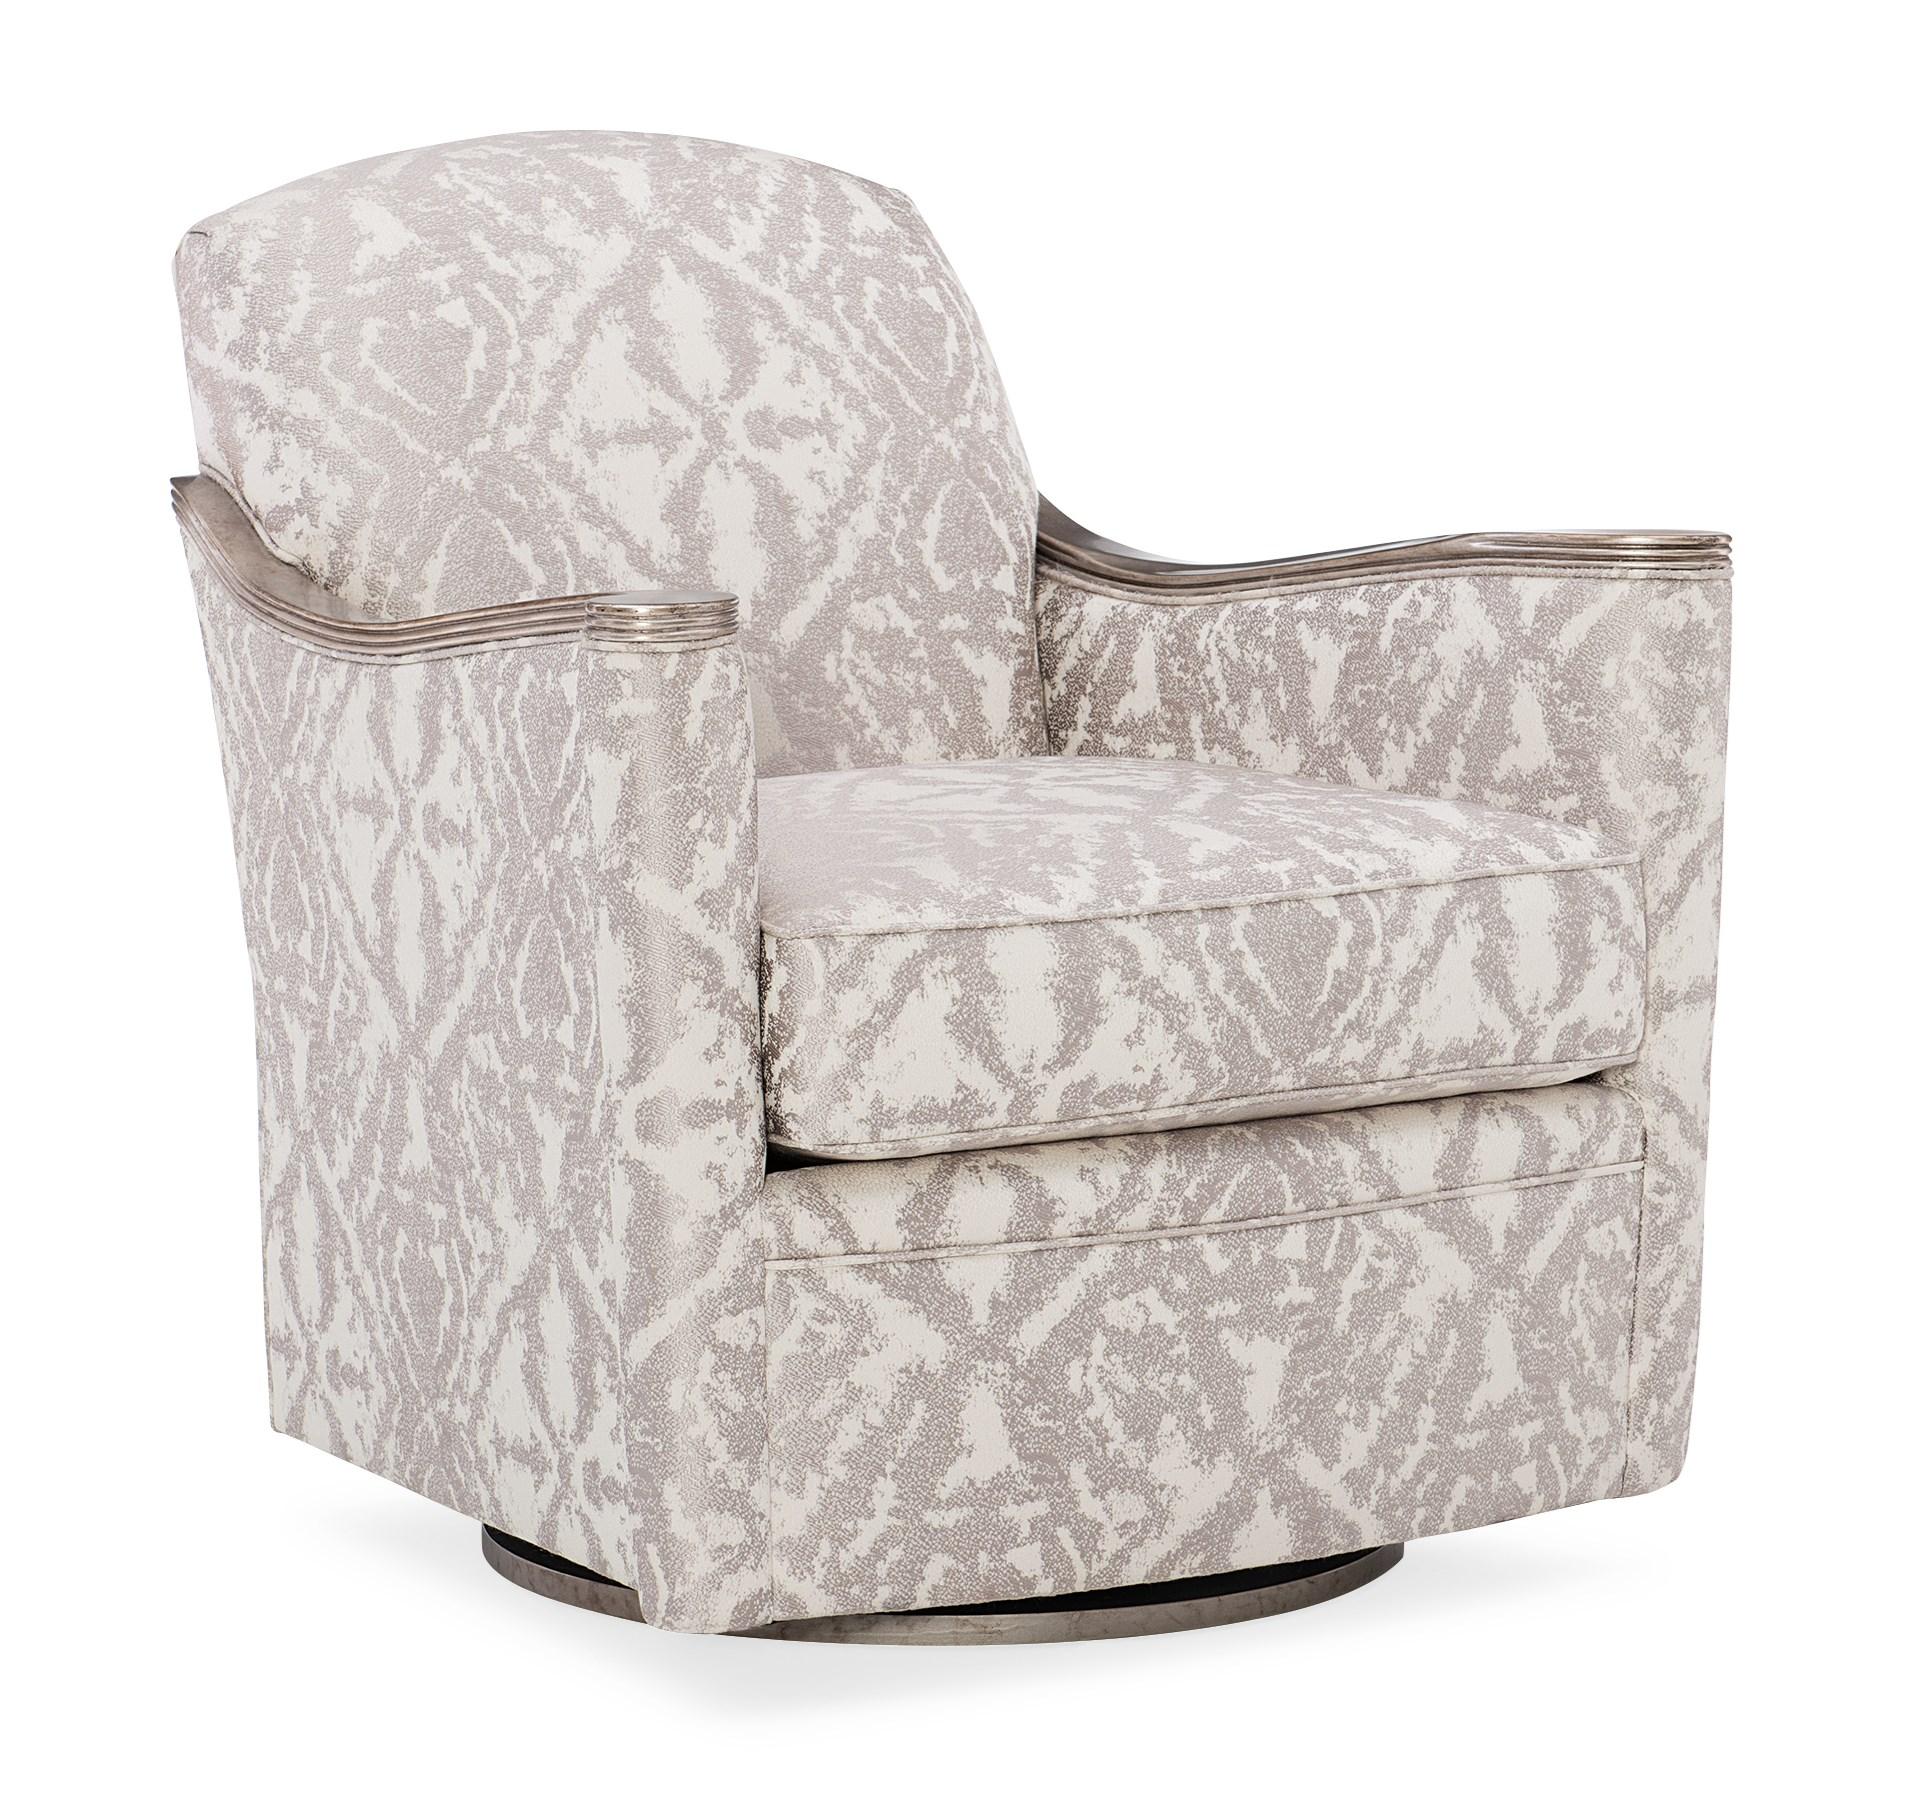 

    
Lavender & Cream Damask Fabric Swivel Chairs Set 2Pcs AROUND WE GO by Caracole
